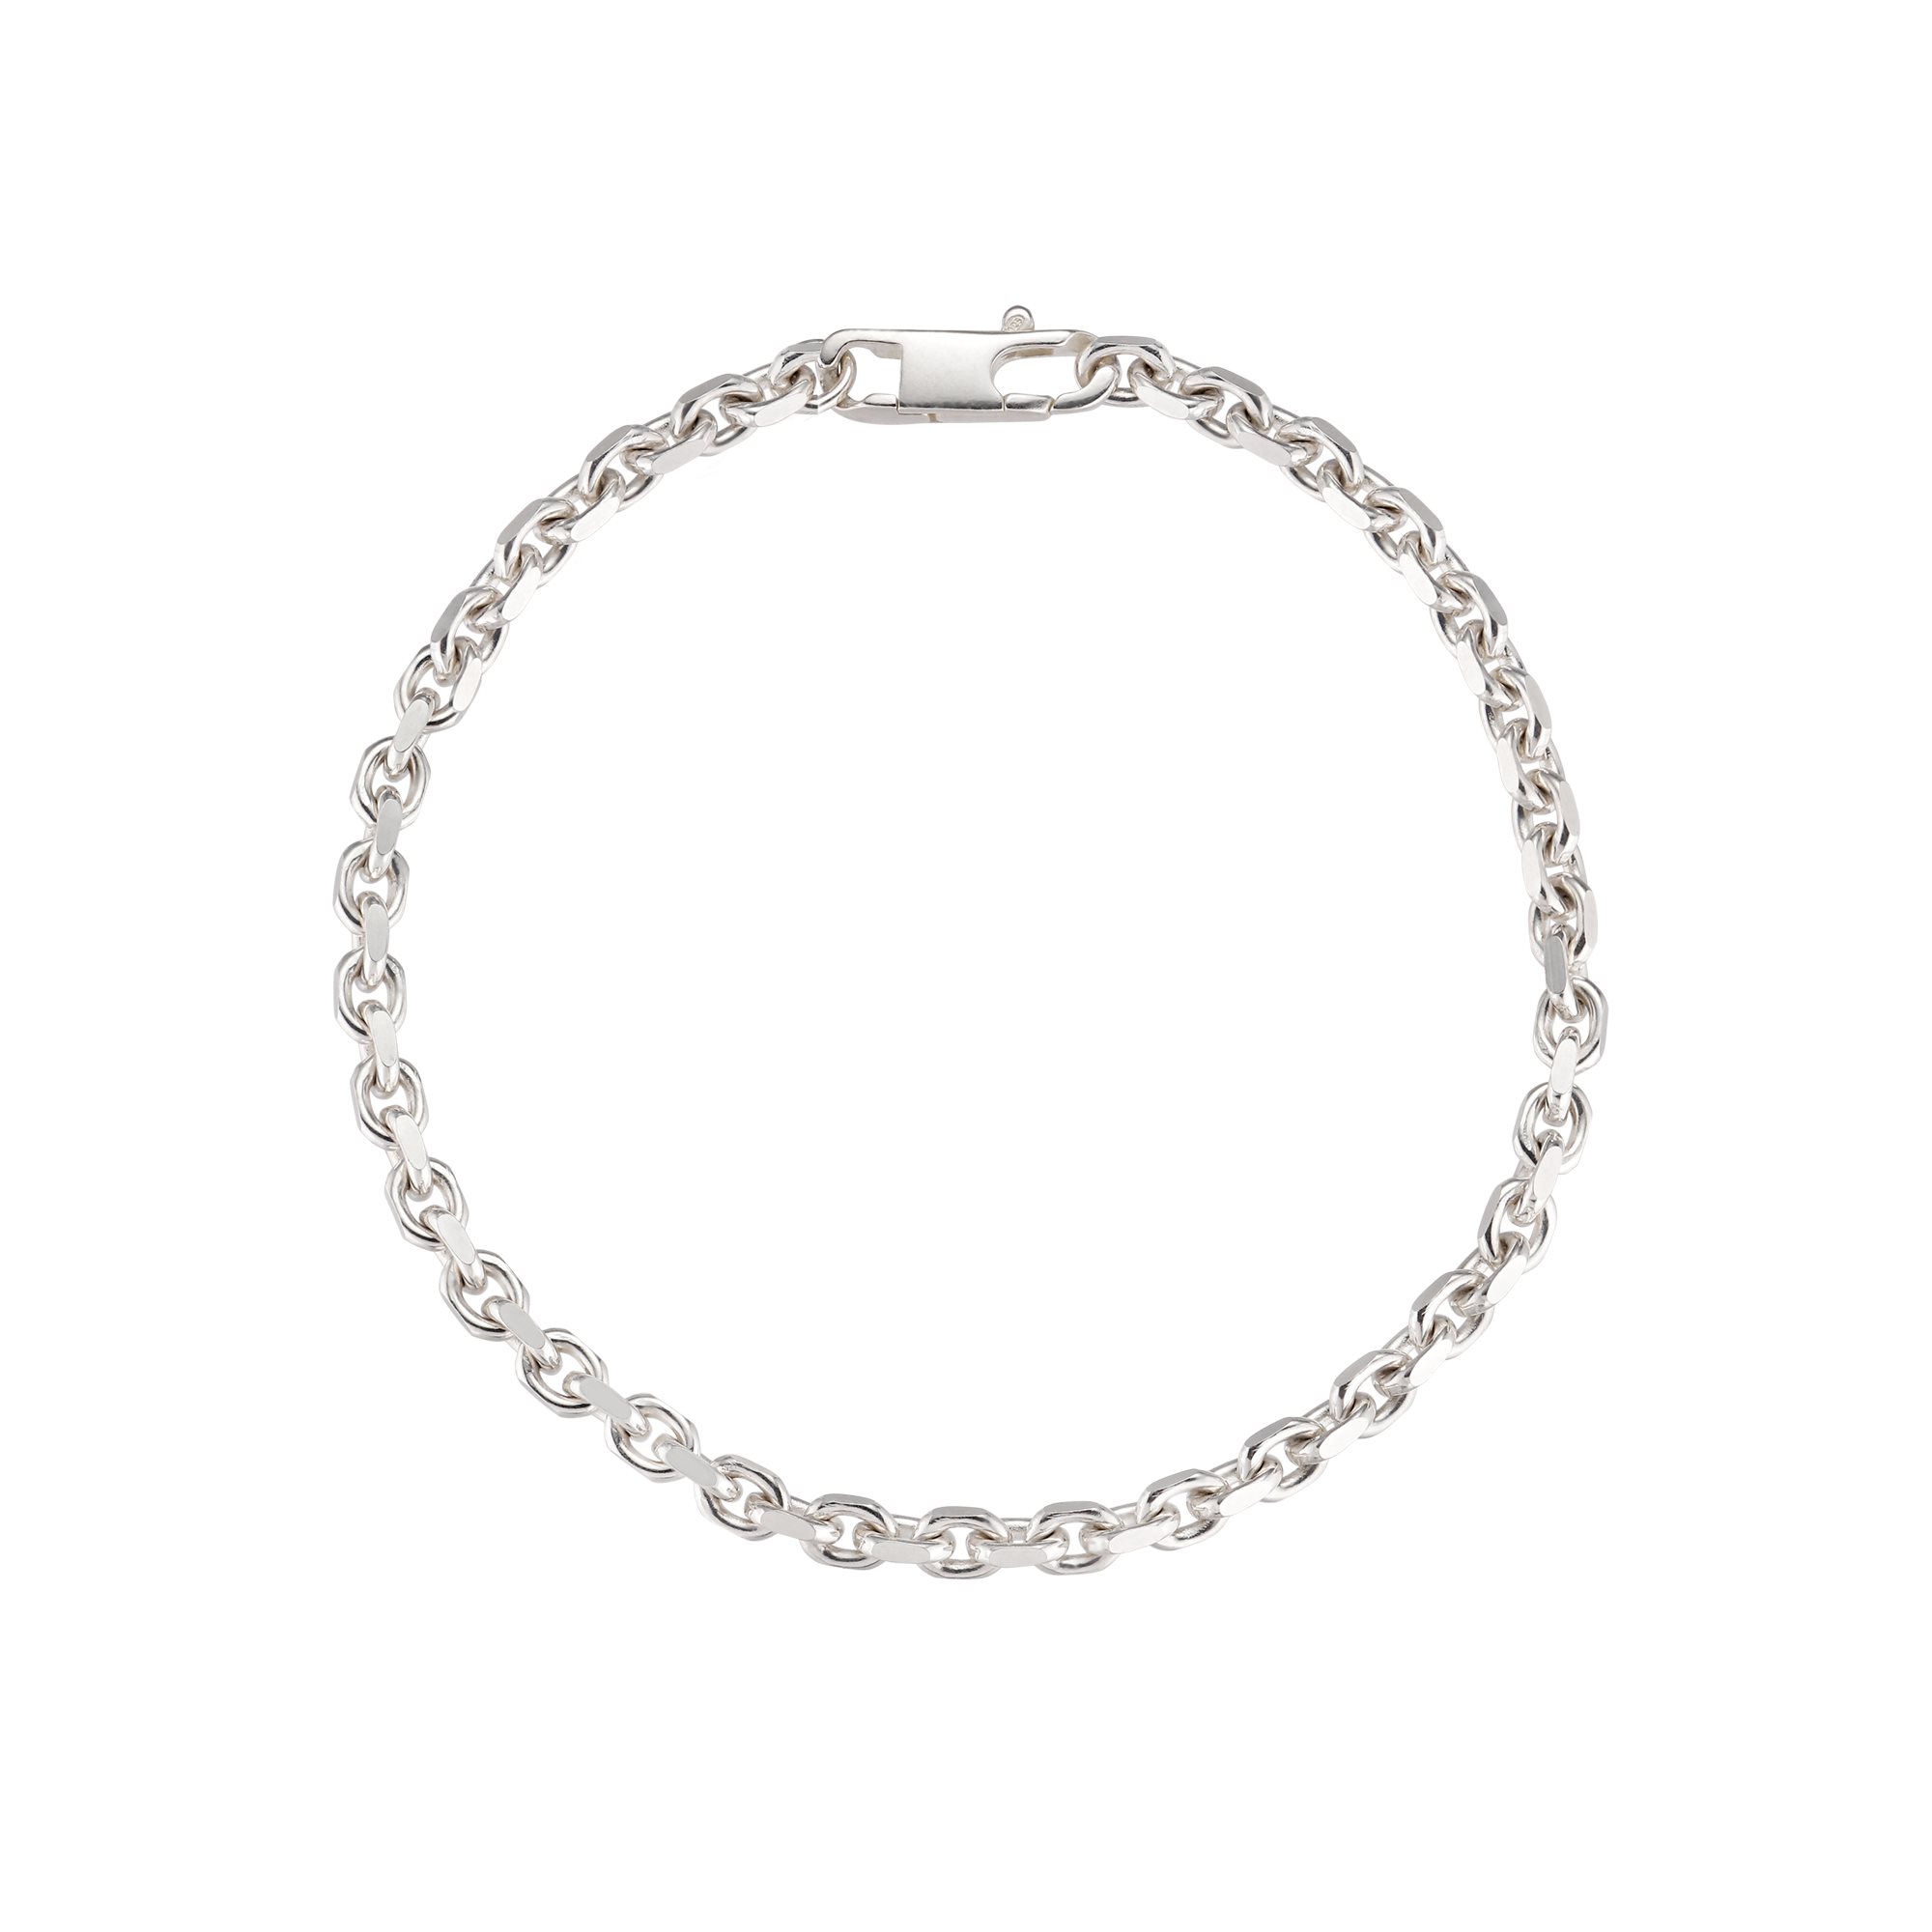 Connected Bracelet 4 - Accessories - Silver